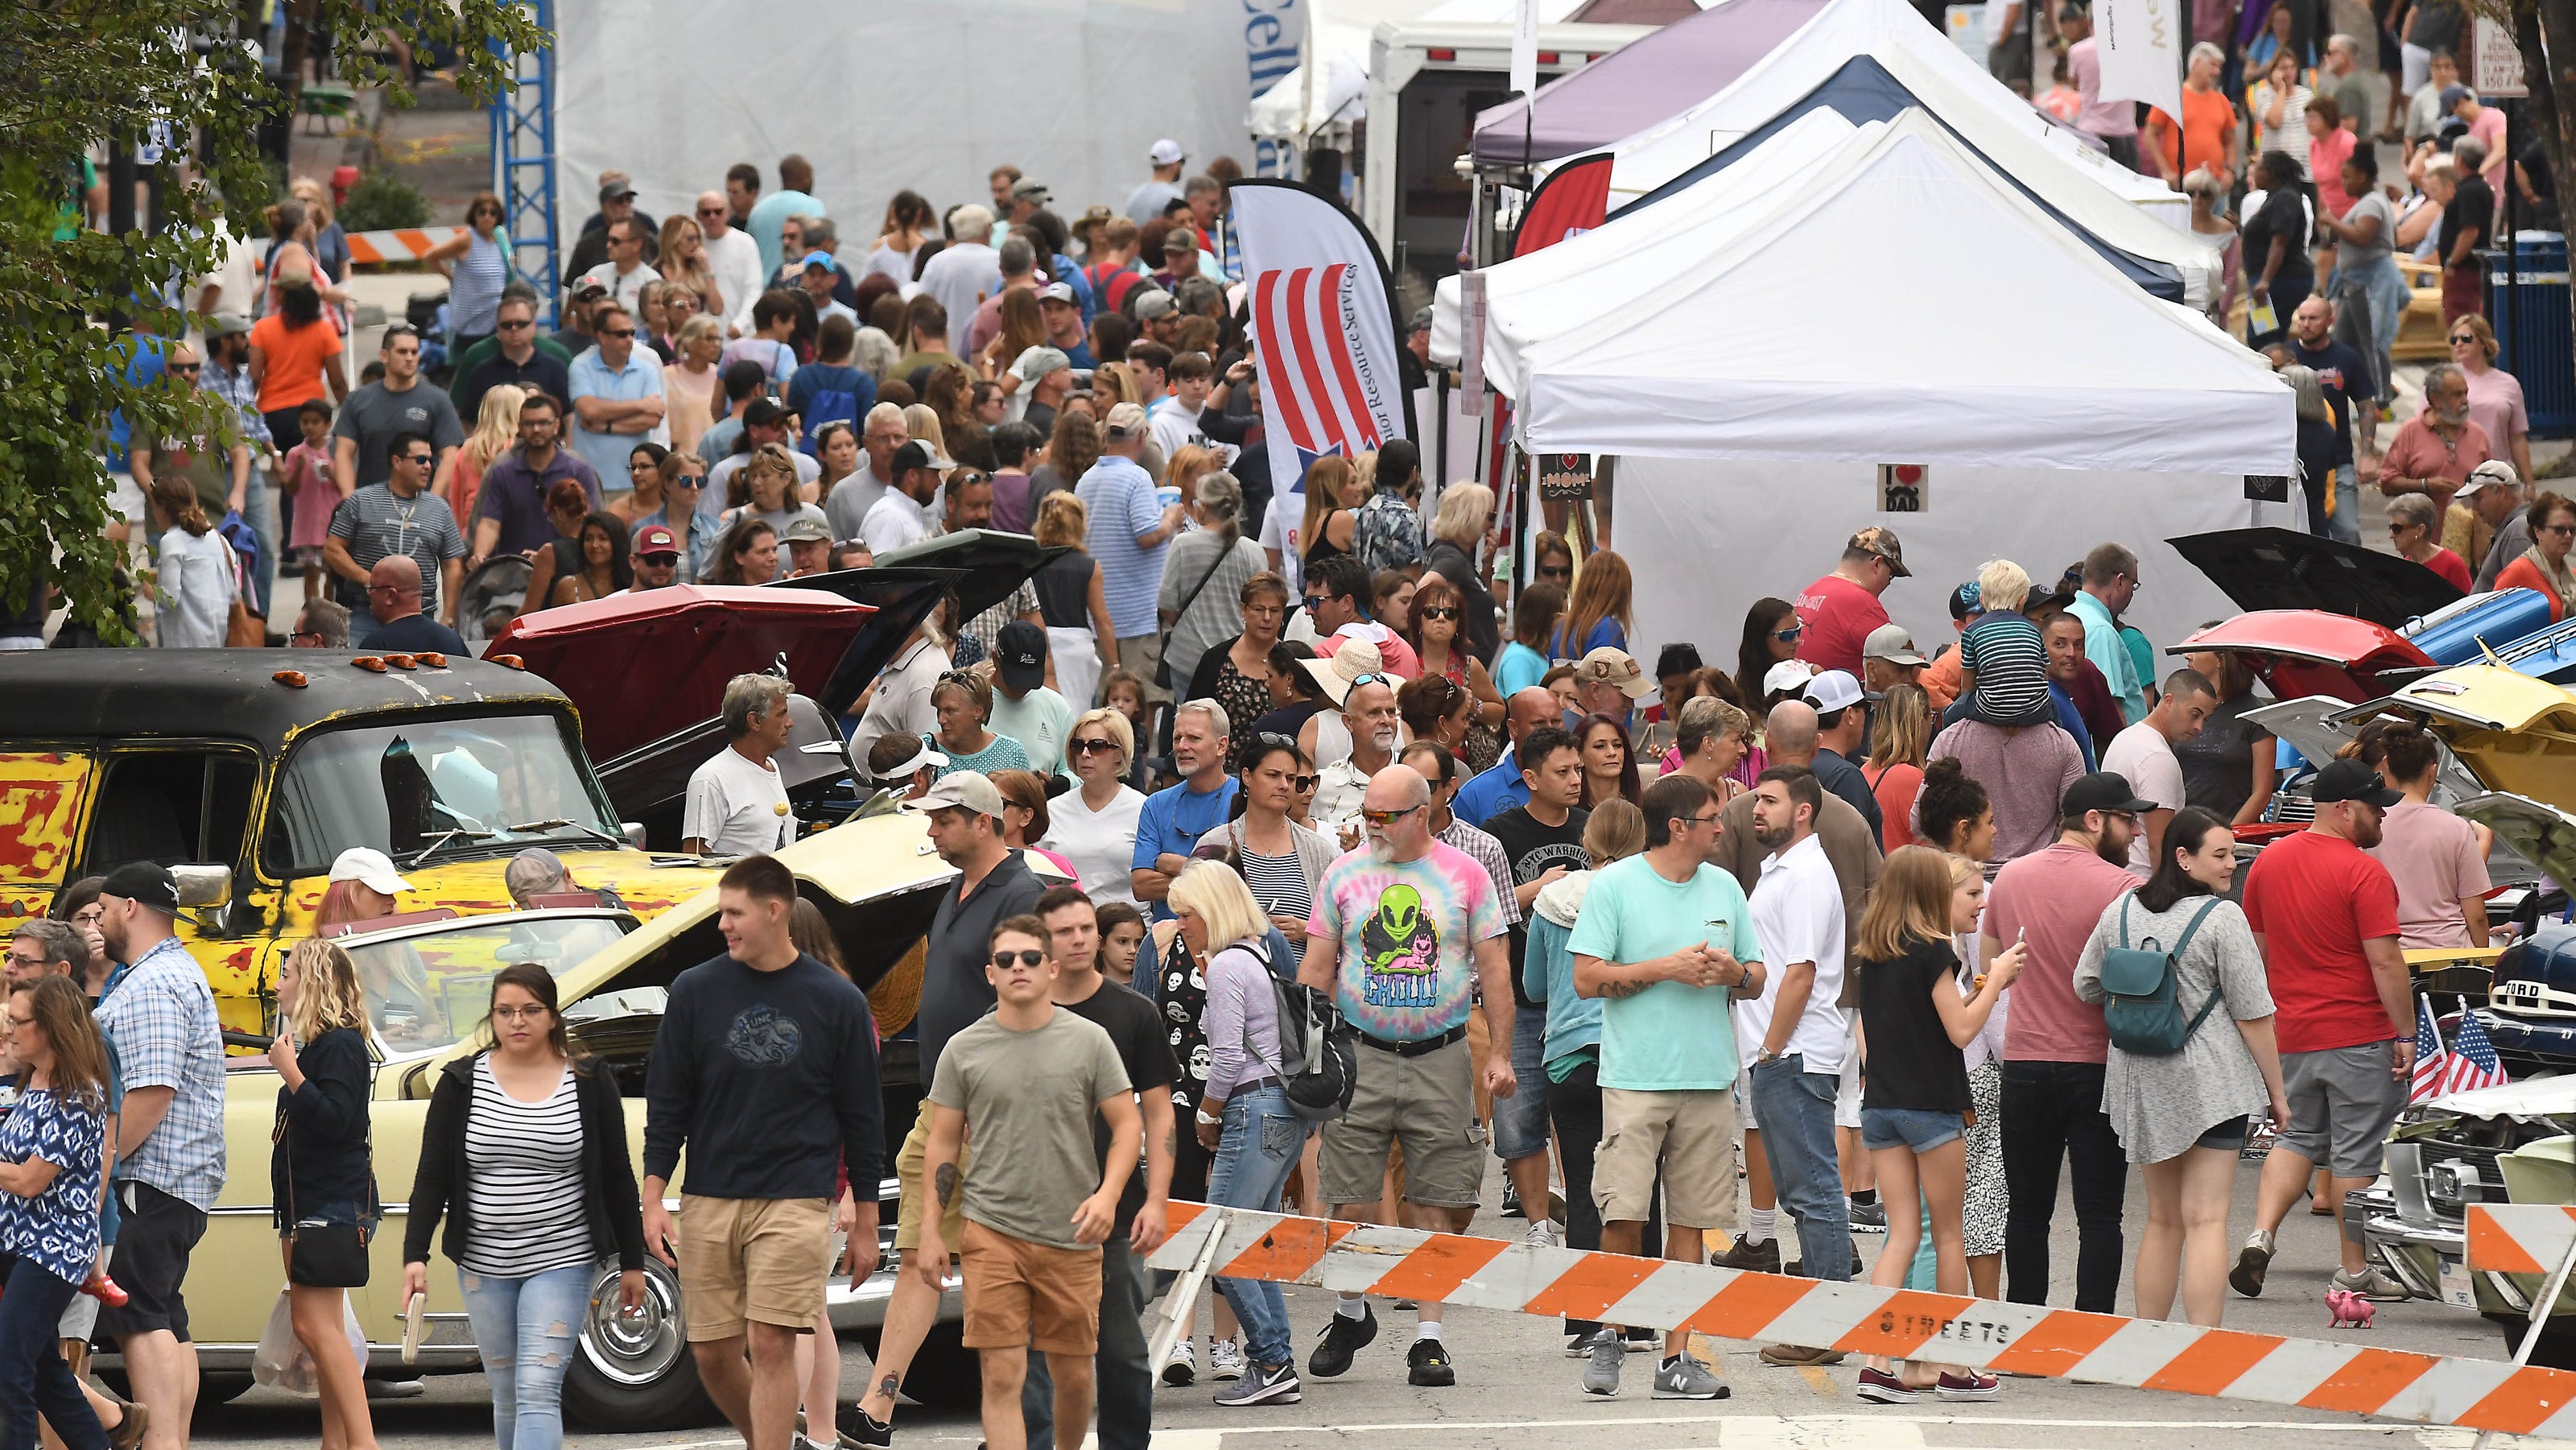 2021 Wilmington Riverfest canceled due to COVID19 concerns